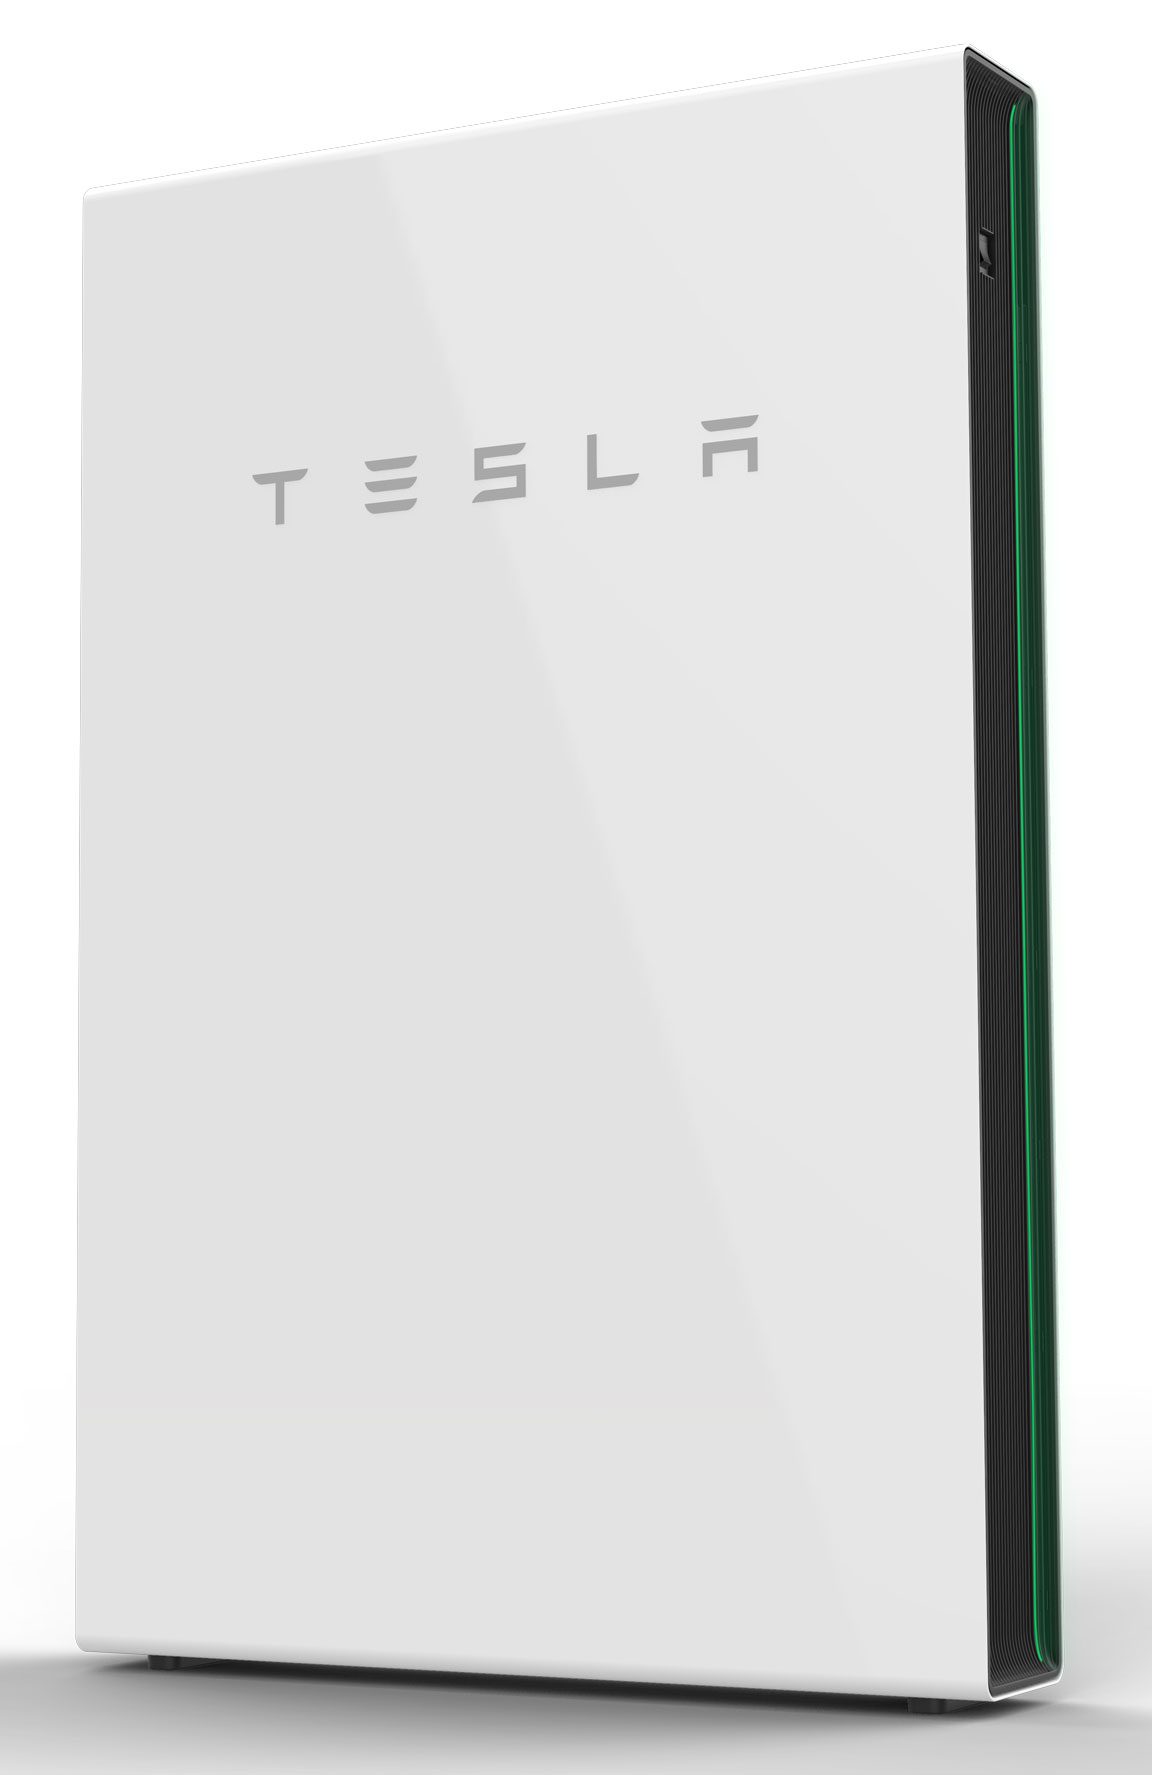 Read more about the article Tesla Powerwall: The Future of Solar Energy Storage